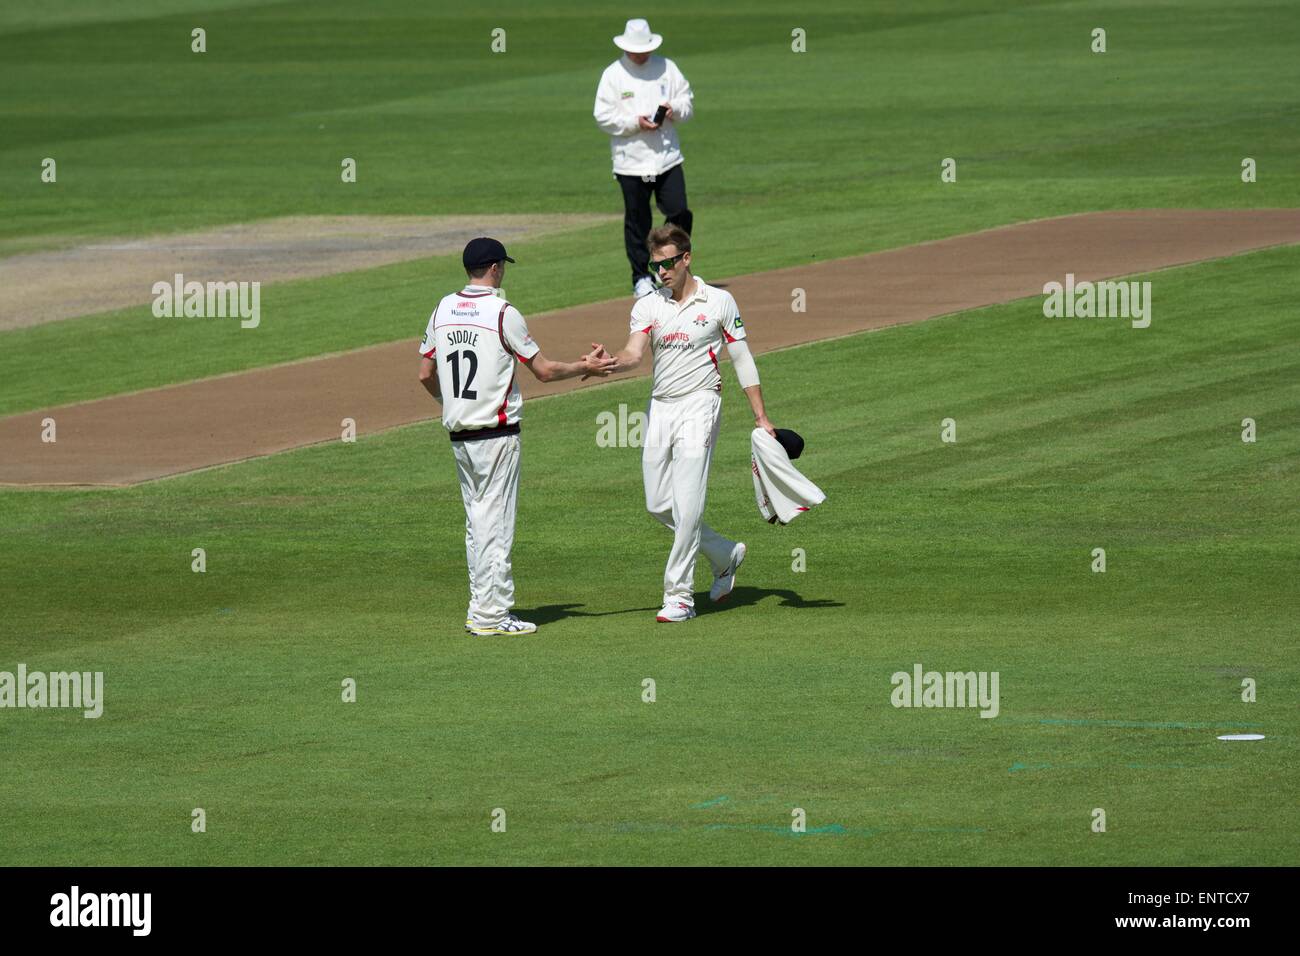 Old Trafford, Manchester, UK. 11th May, 2015. Peter Siddle congratulates Kyle Jarvis (Lancs) on taking the final wicket of the Gloucestershire innings. Jarvis finishes with figures of 4 for 121. County Cricket Lancashire v Gloucestershire Day 2 Credit:  John Fryer/Alamy Live News Stock Photo